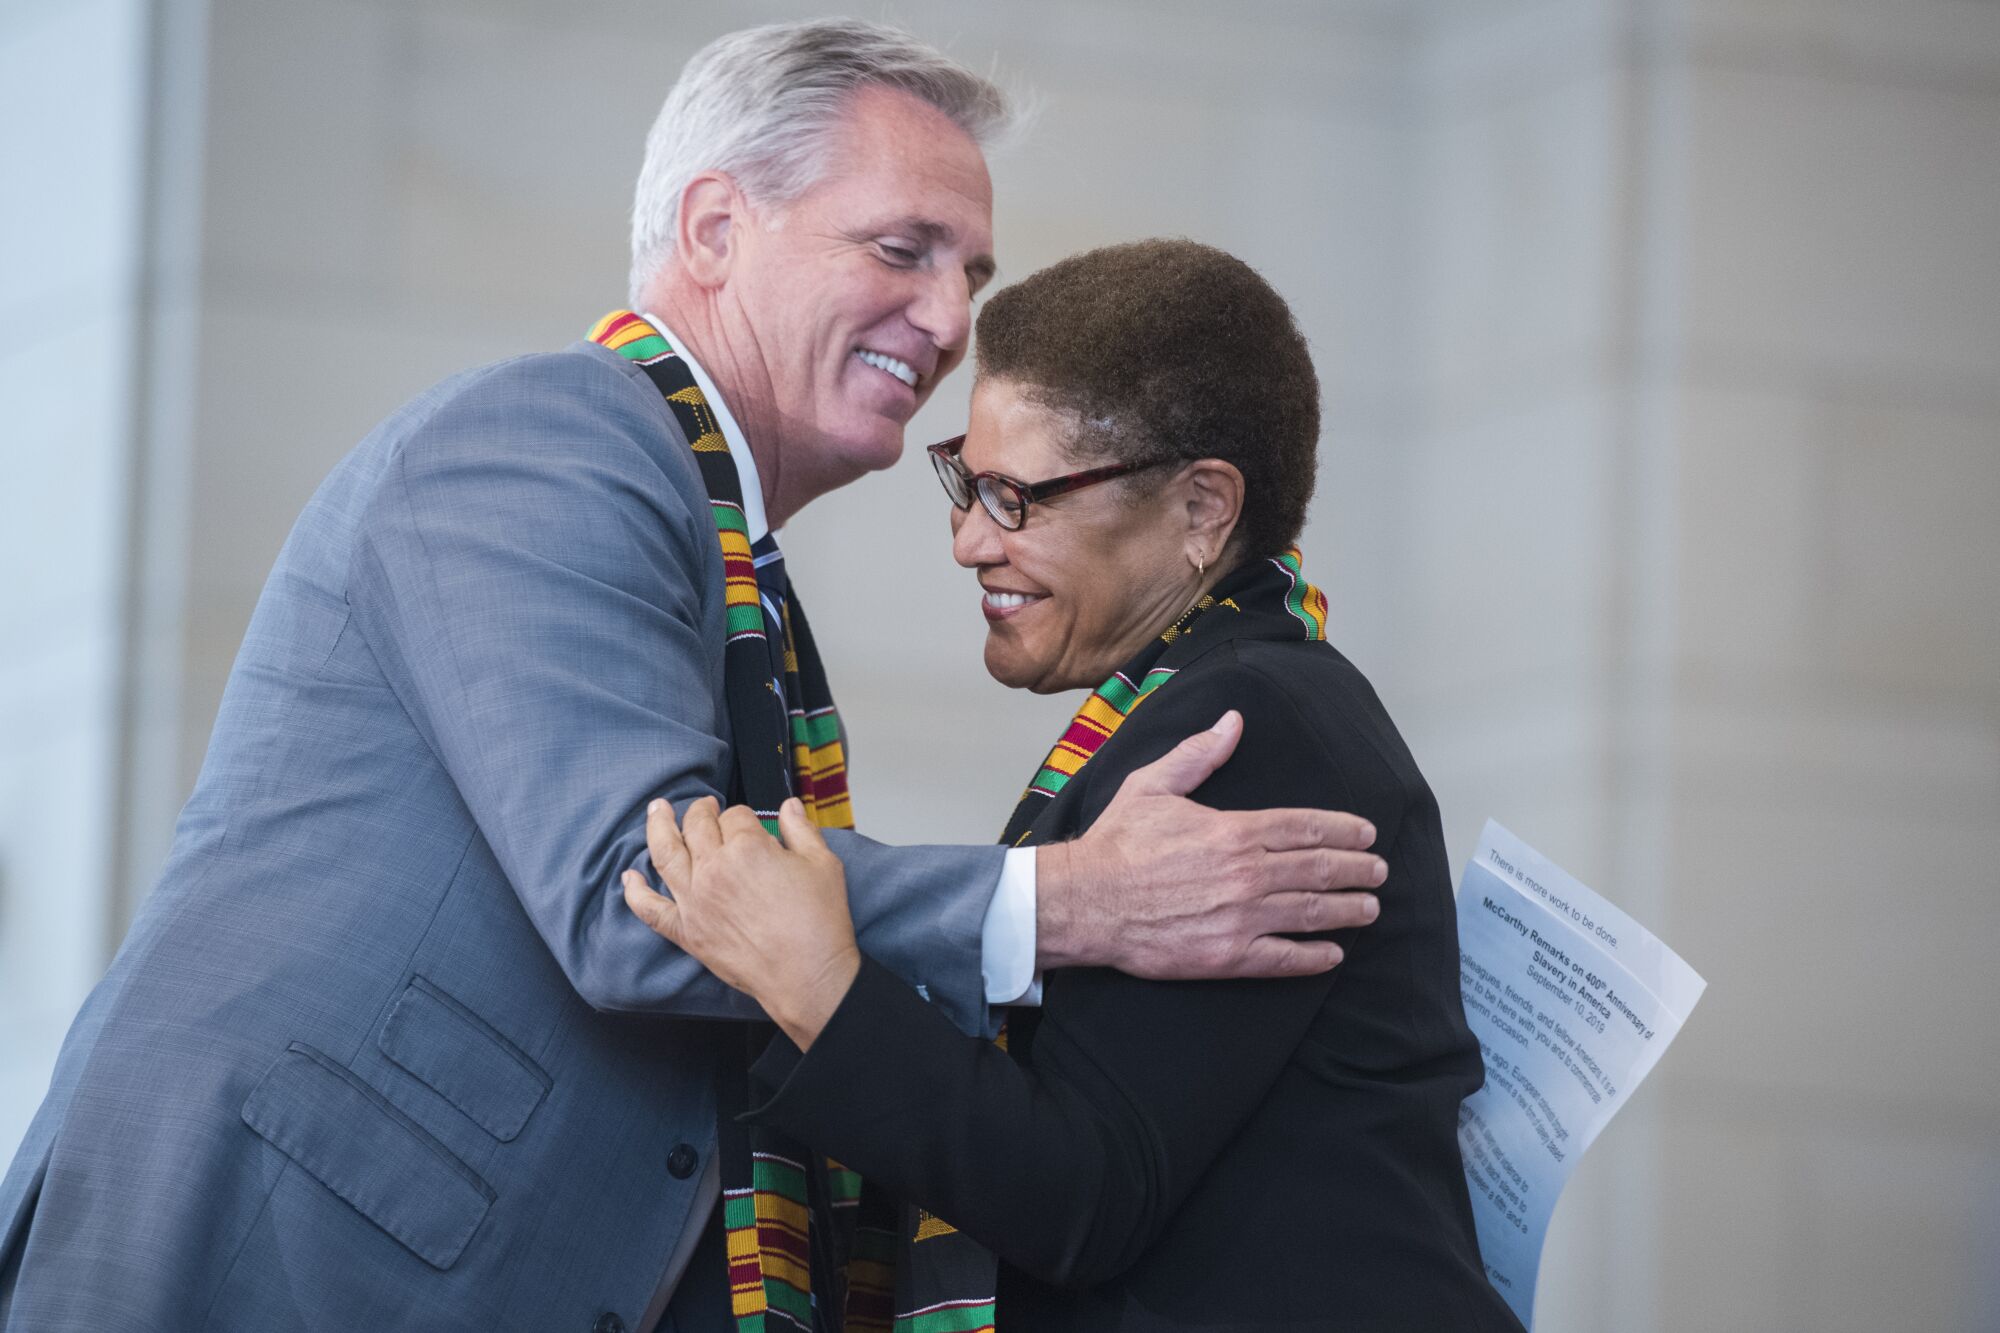 Reps. Kevin McCarthy and Rep. Karen Bass, wearing kente cloth scarves, embrace in the Capitol's Emancipation Hall in 2019.